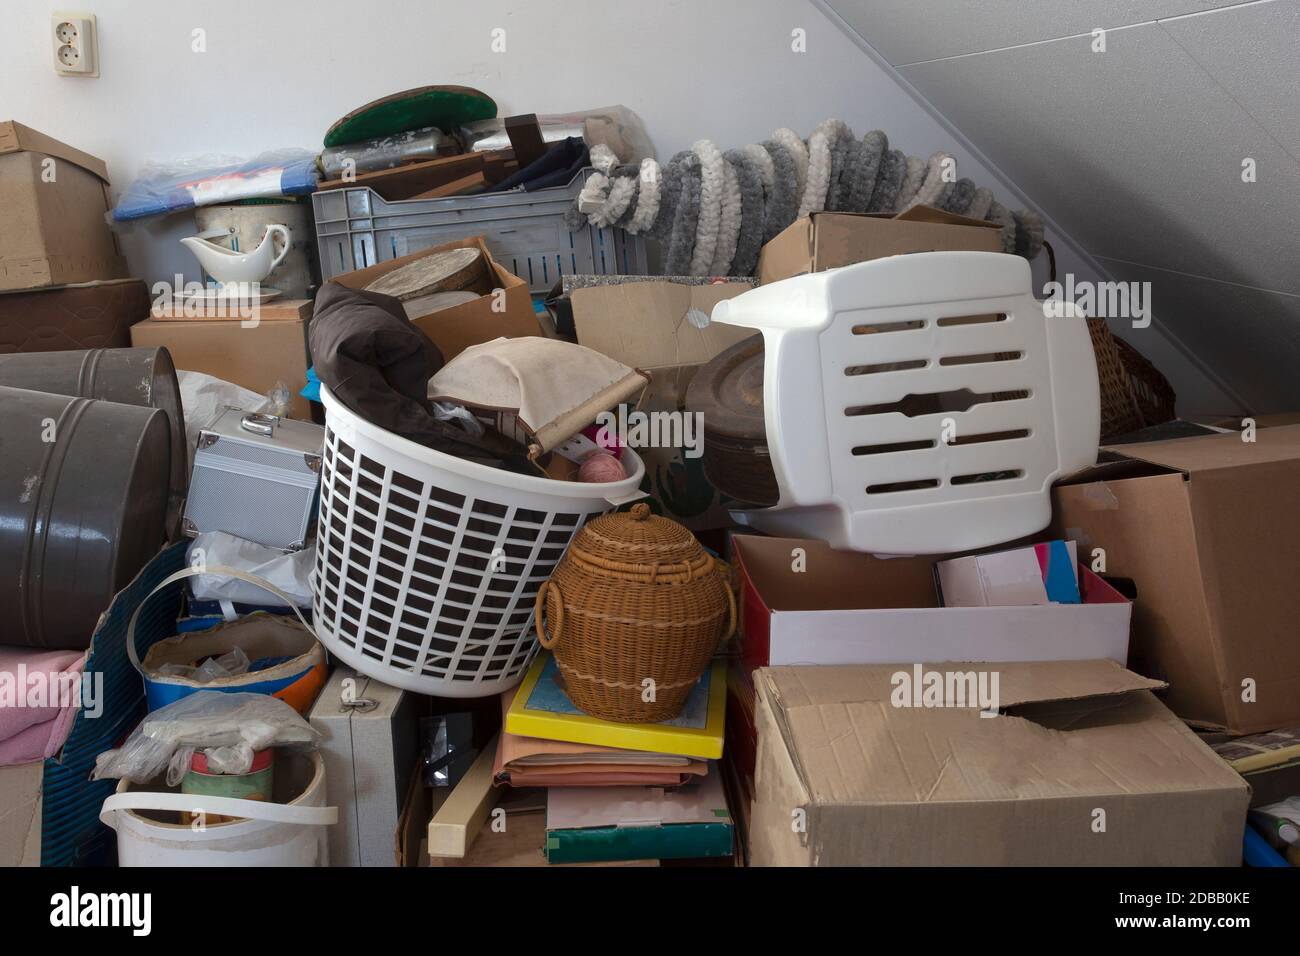 Pile of junk in a house, hoarder room pile of household equipment needs clearing out storage Stock Photo